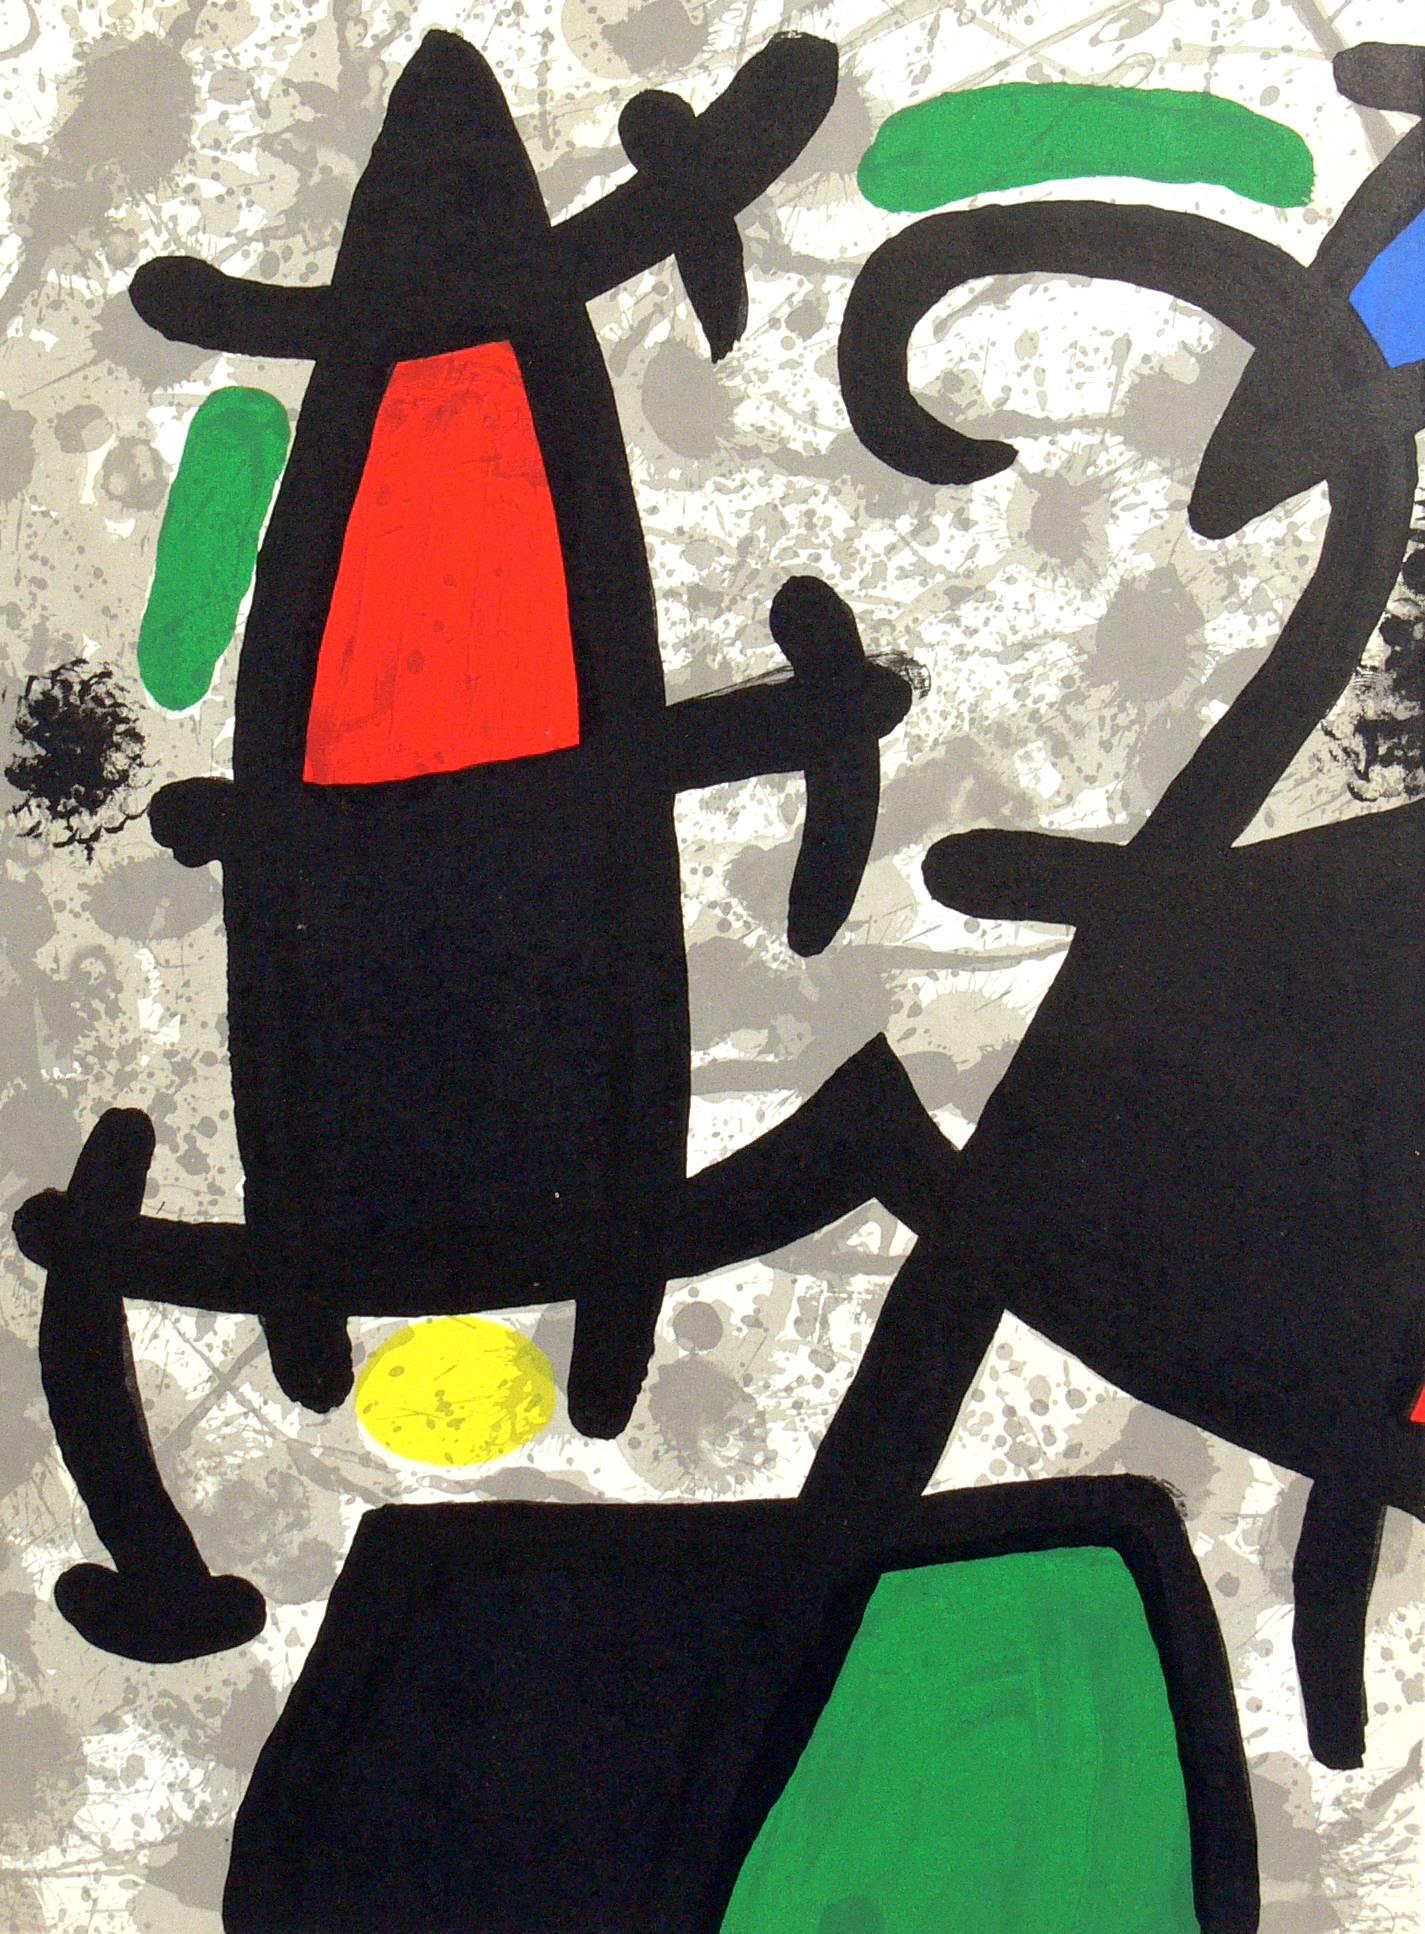 Selection of Joan Miro color lithographs, France, circa 1960s. The lithograph on the left in the first photo has been sold. The other two are available. We purchased a group of these color lithographs from the estate of a couple that lived in France